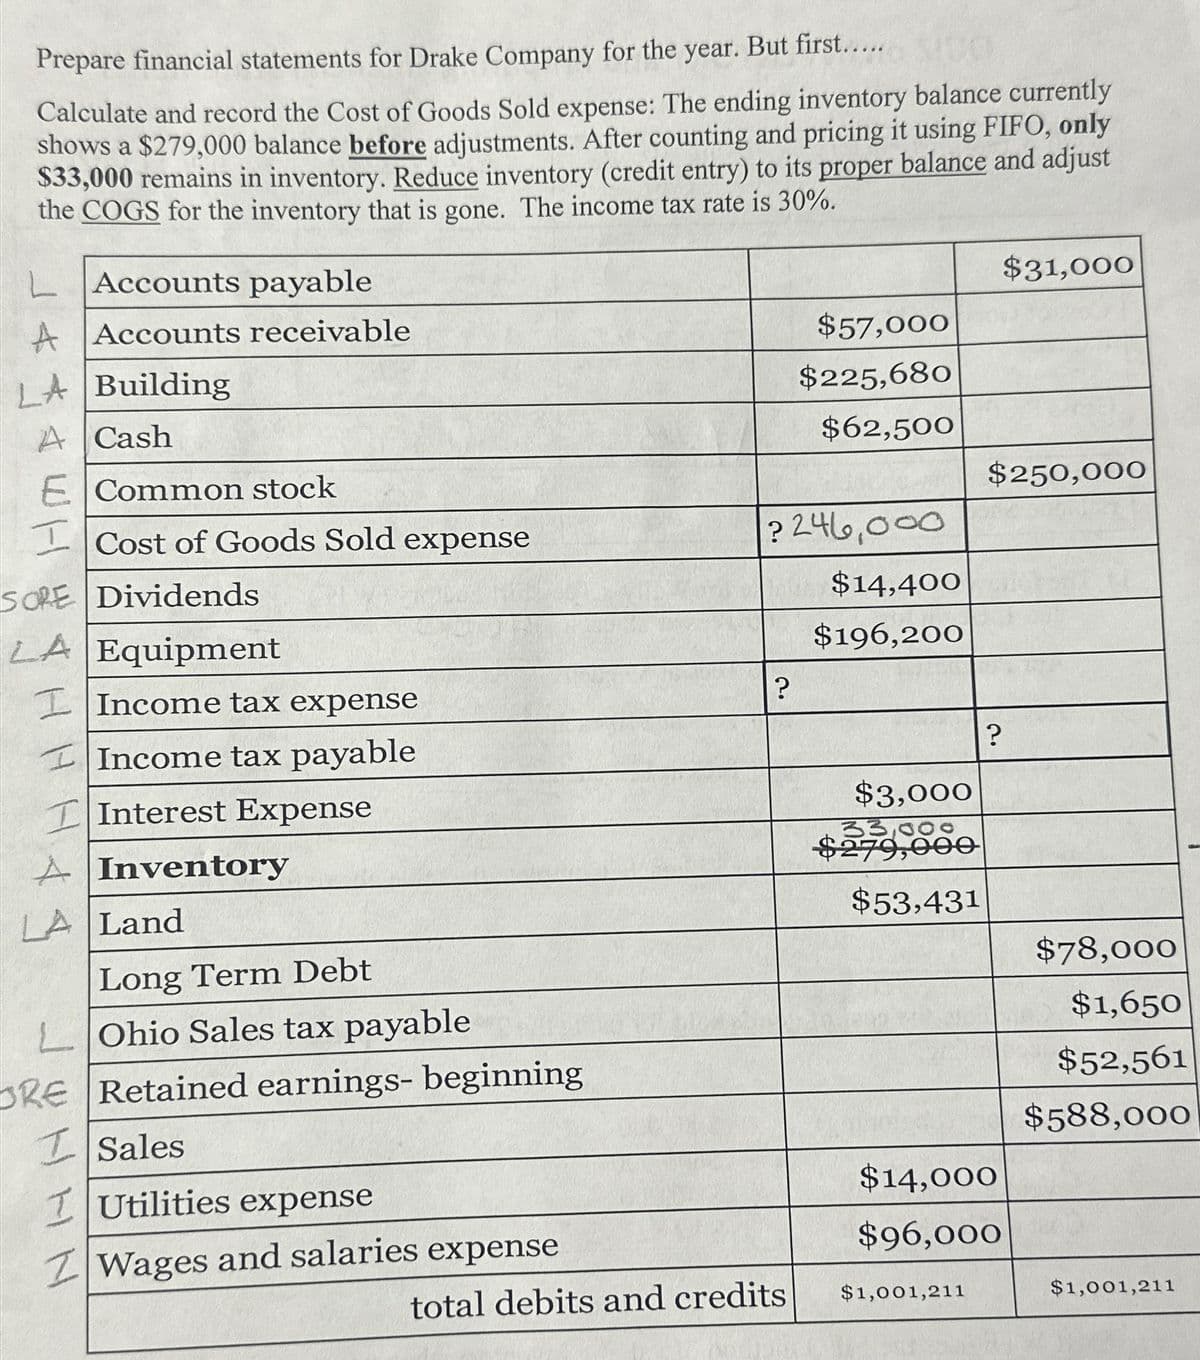 Prepare financial statements for Drake Company for the year. But first......
Calculate and record the Cost of Goods Sold expense: The ending inventory balance currently
shows a $279,000 balance before adjustments. After counting and pricing it using FIFO, only
$33,000 remains in inventory. Reduce inventory (credit entry) to its proper balance and adjust
the COGS for the inventory that is gone. The income tax rate is 30%.
LAccounts payable
A Accounts receivable
LA Building
A Cash
E Common stock
I Cost of Goods Sold expense
SORE Dividends
LA Equipment
Income tax expense
Income tax payable
Interest Expense
Inventory
LA Land
Long Term Debt
LOhio Sales tax payable
ORE Retained earnings- beginning
Sales
Utilities expense
Wages and salaries expense
? 246,000
$14,400
$196,200
?
$57,000
$225,680
$62,500
total debits and credits
$3,000
33
$279,000
$53,431
$1,001,211
$250,000
?
$14,000
$96,000
$31,000
$78,000
$1,650
$52,561
$588,000
$1,001,211